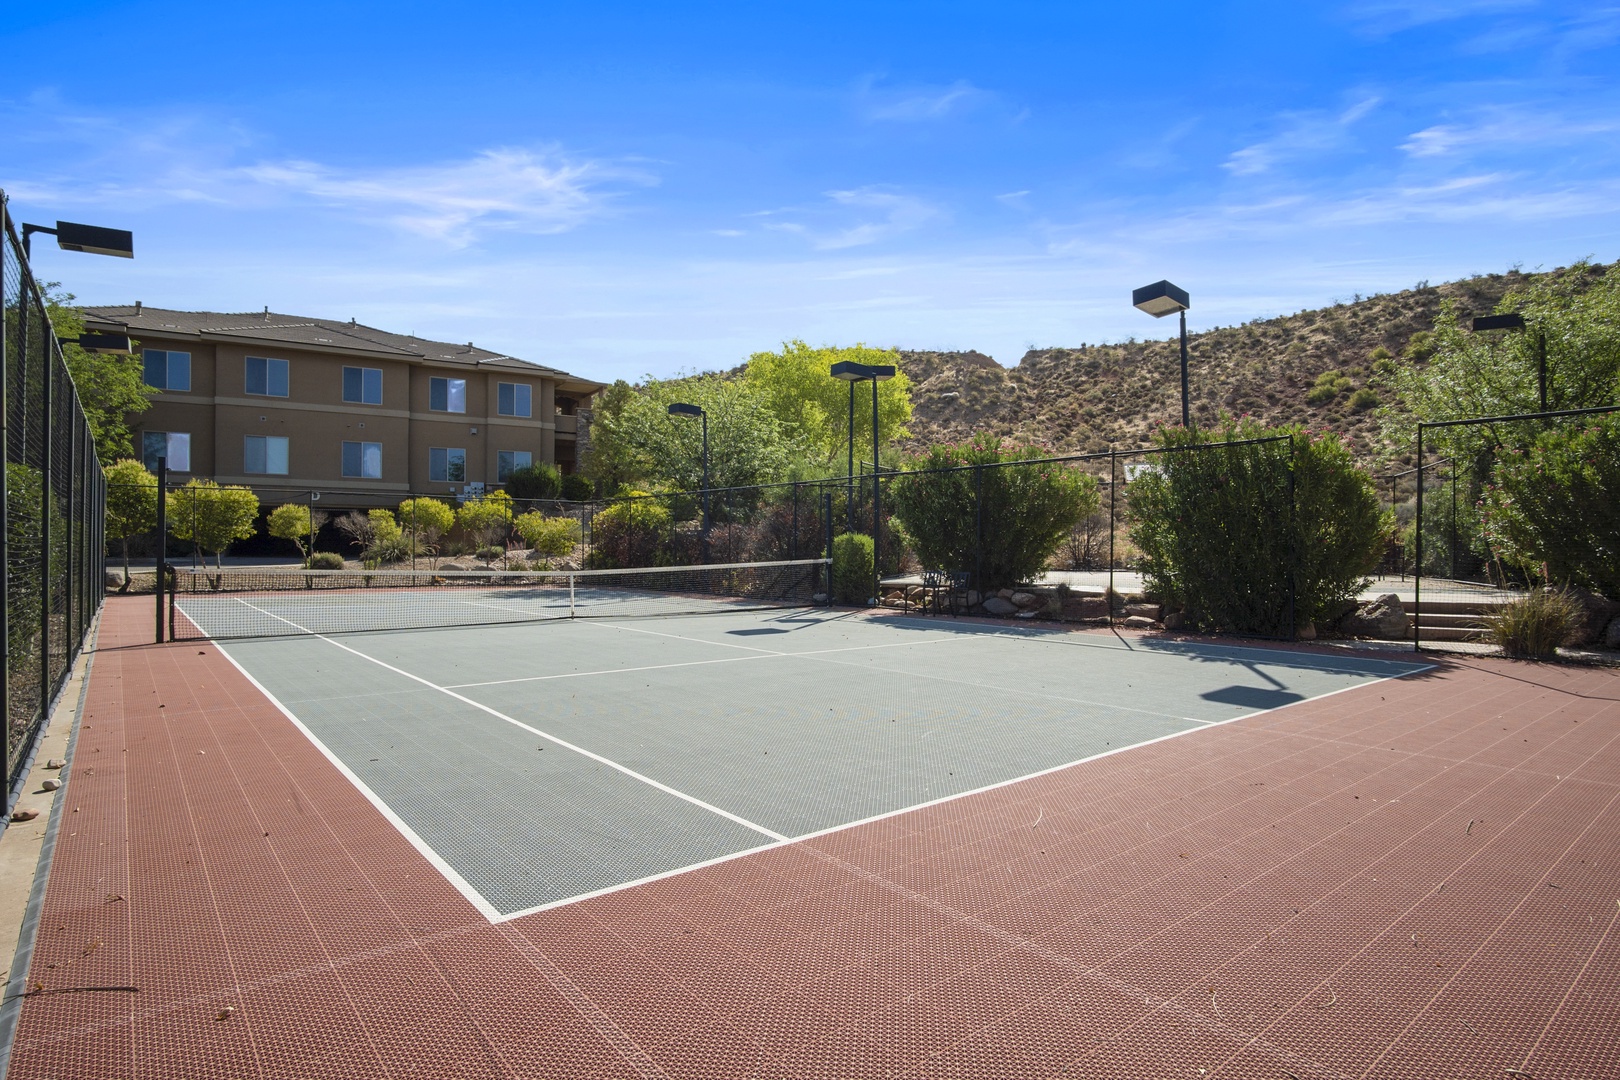 Enjoy all the fabulous community amenities at your fingertips during your stay